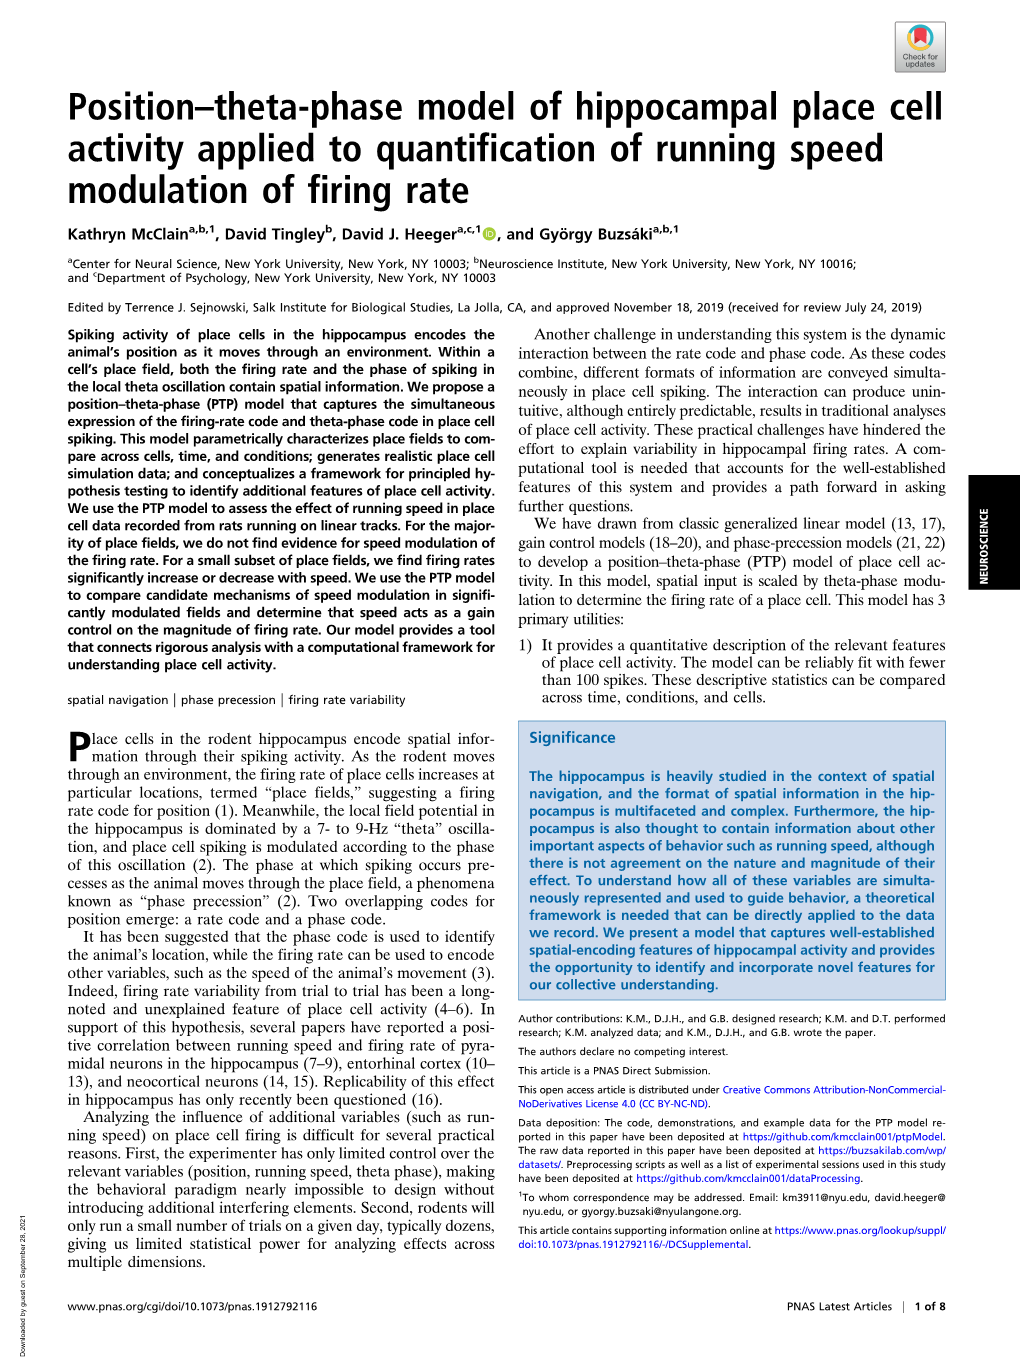 Position–Theta-Phase Model of Hippocampal Place Cell Activity Applied to Quantification of Running Speed Modulation of Firing Rate